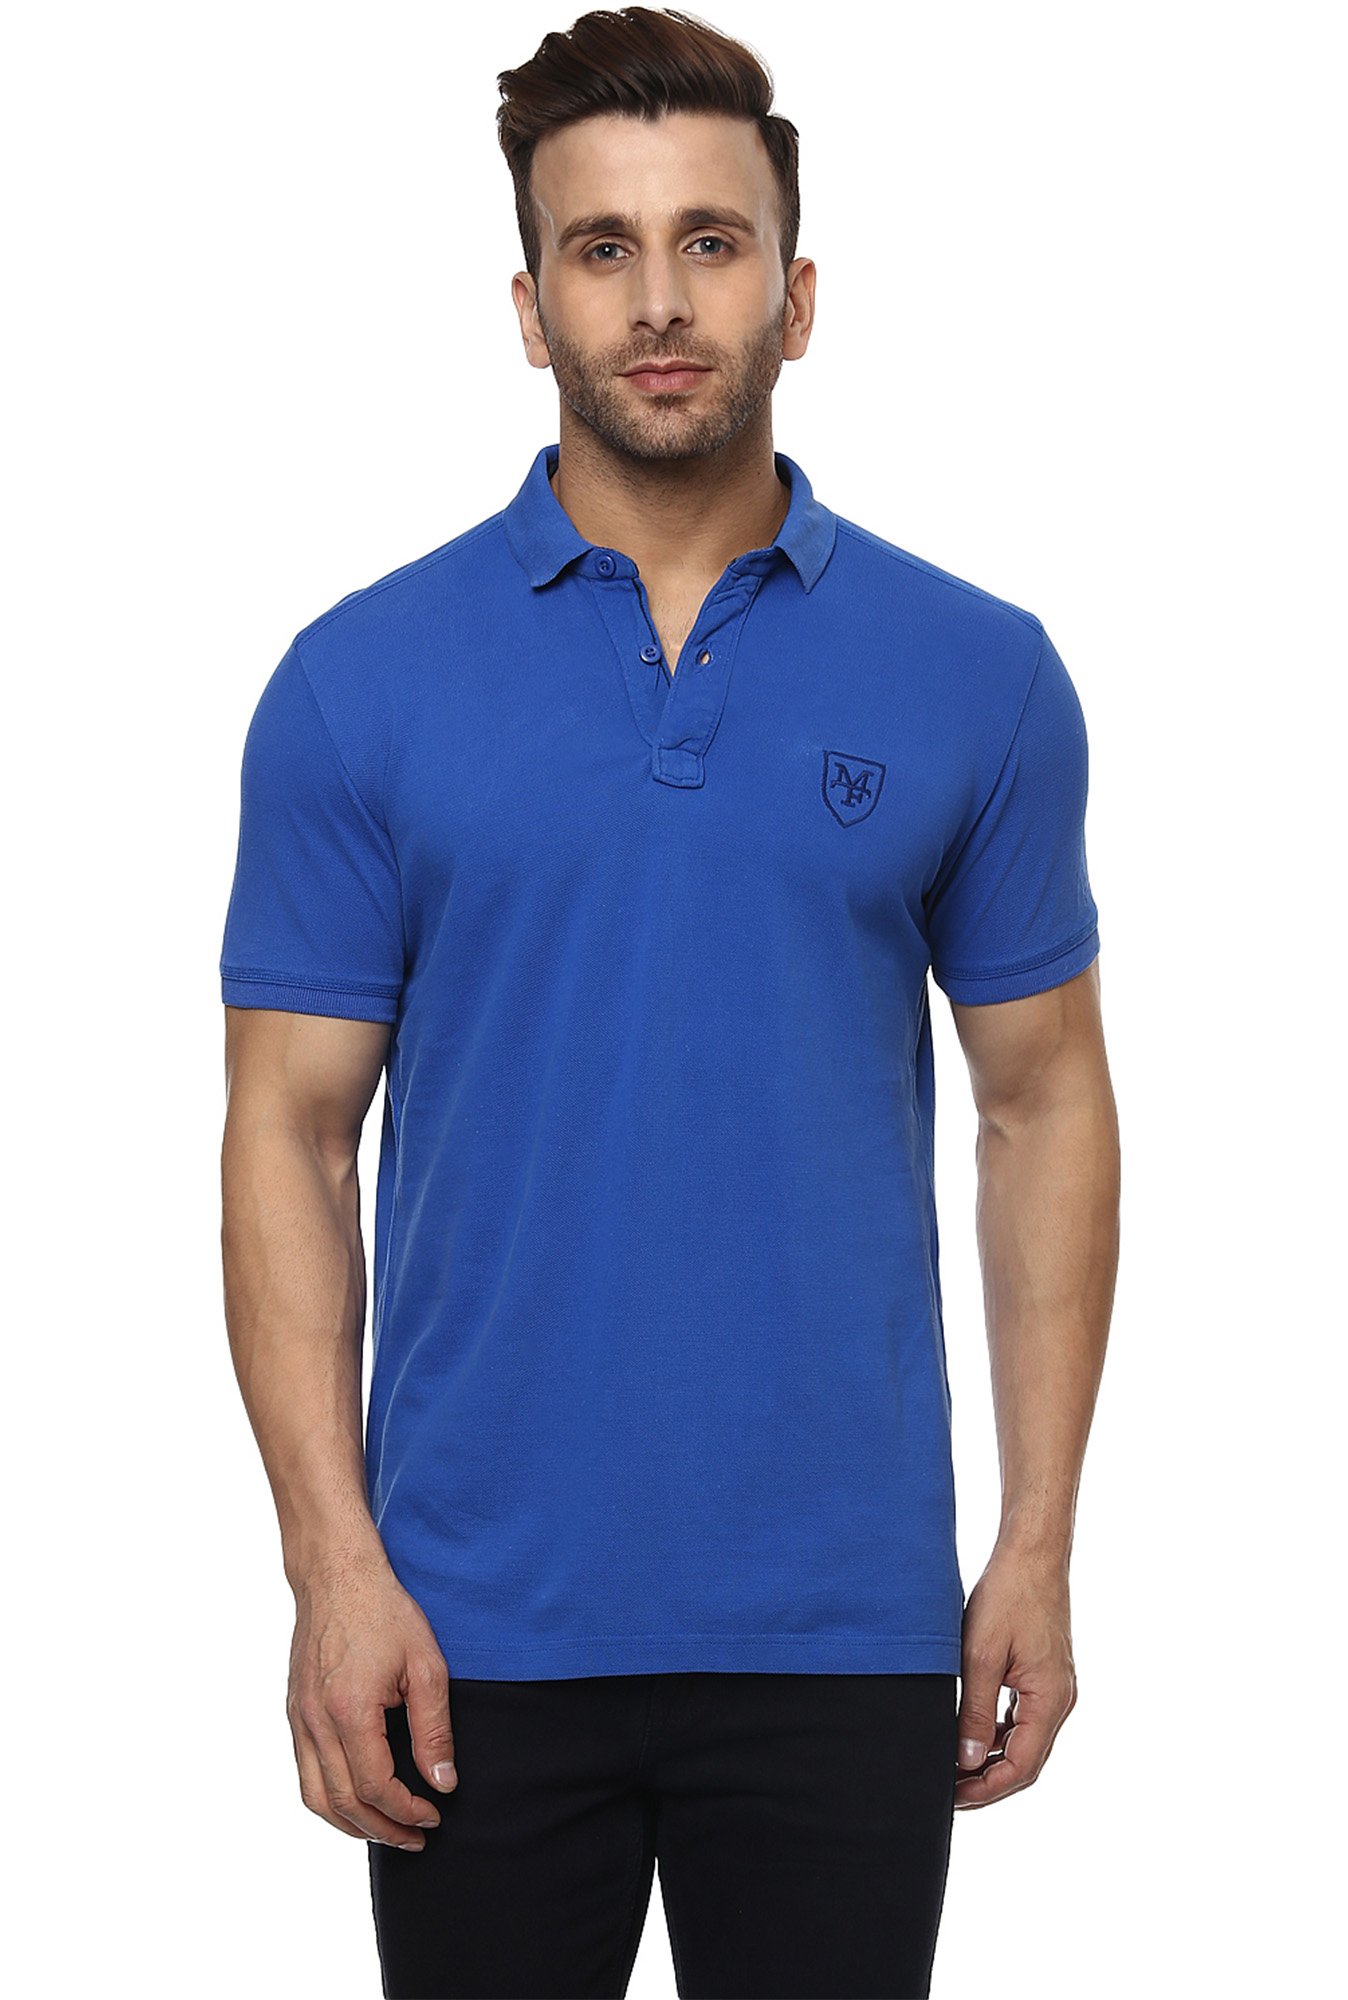 Dark Blue Polo T Shirts - Prism Contractors & Engineers